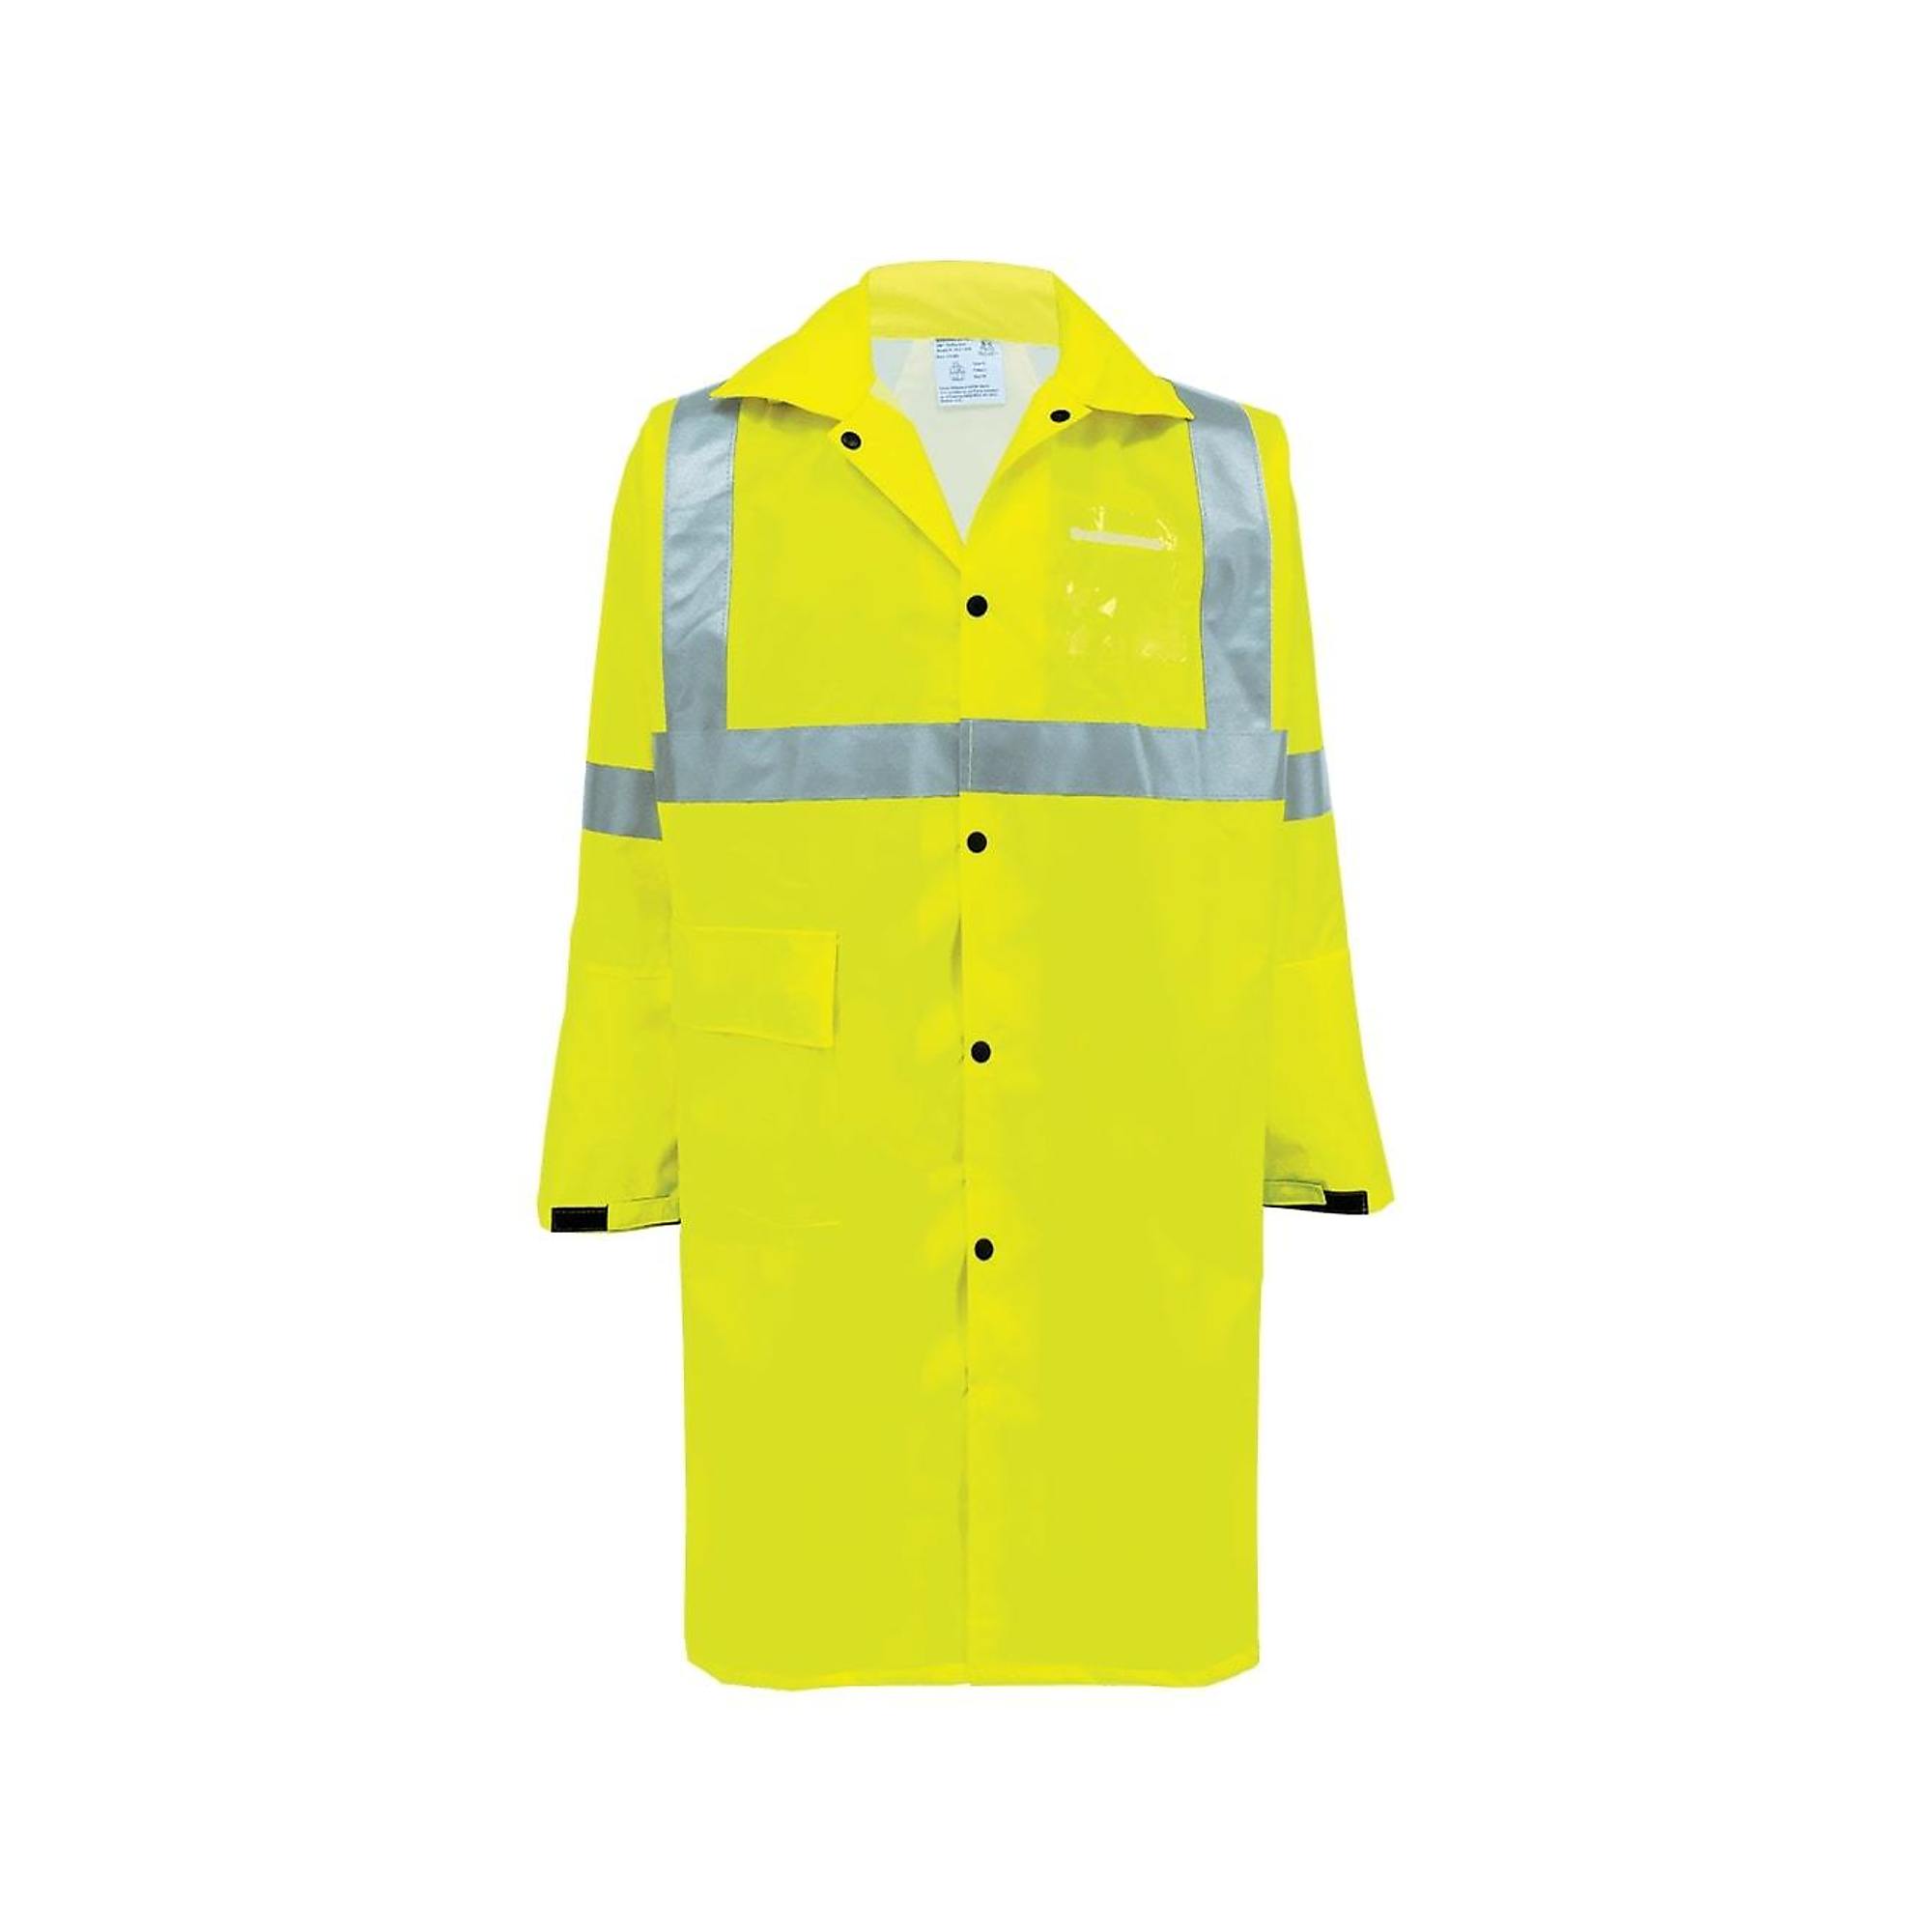 FrogWear, HV Yel/Grn, Class 3 Self-Extinguish, 1 Pocket Duster Jacket, Size XL, Color High-Visibility Yellow/Green, Model GLO-1450-XL